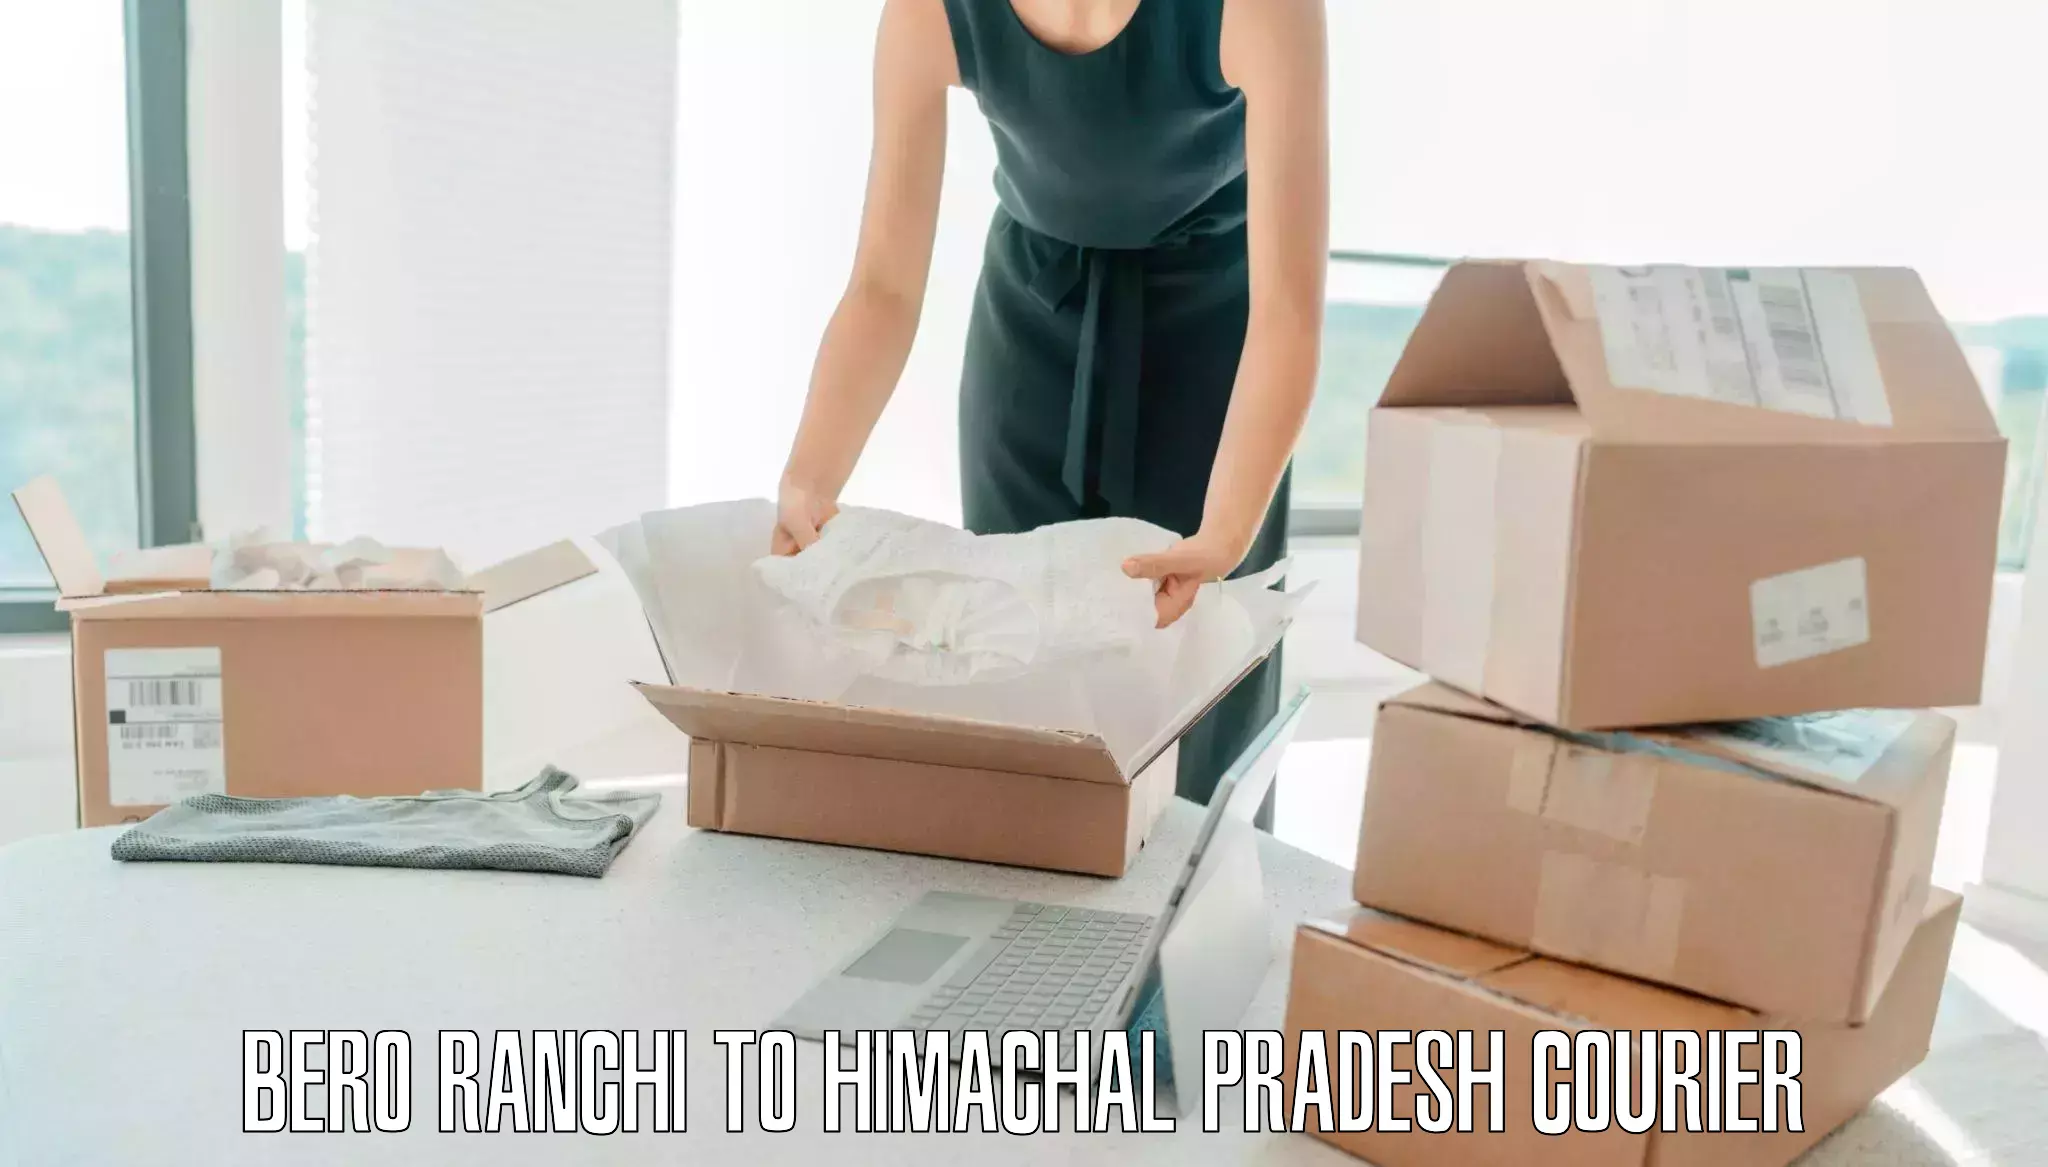 Instant baggage transport quote Bero Ranchi to Palampur